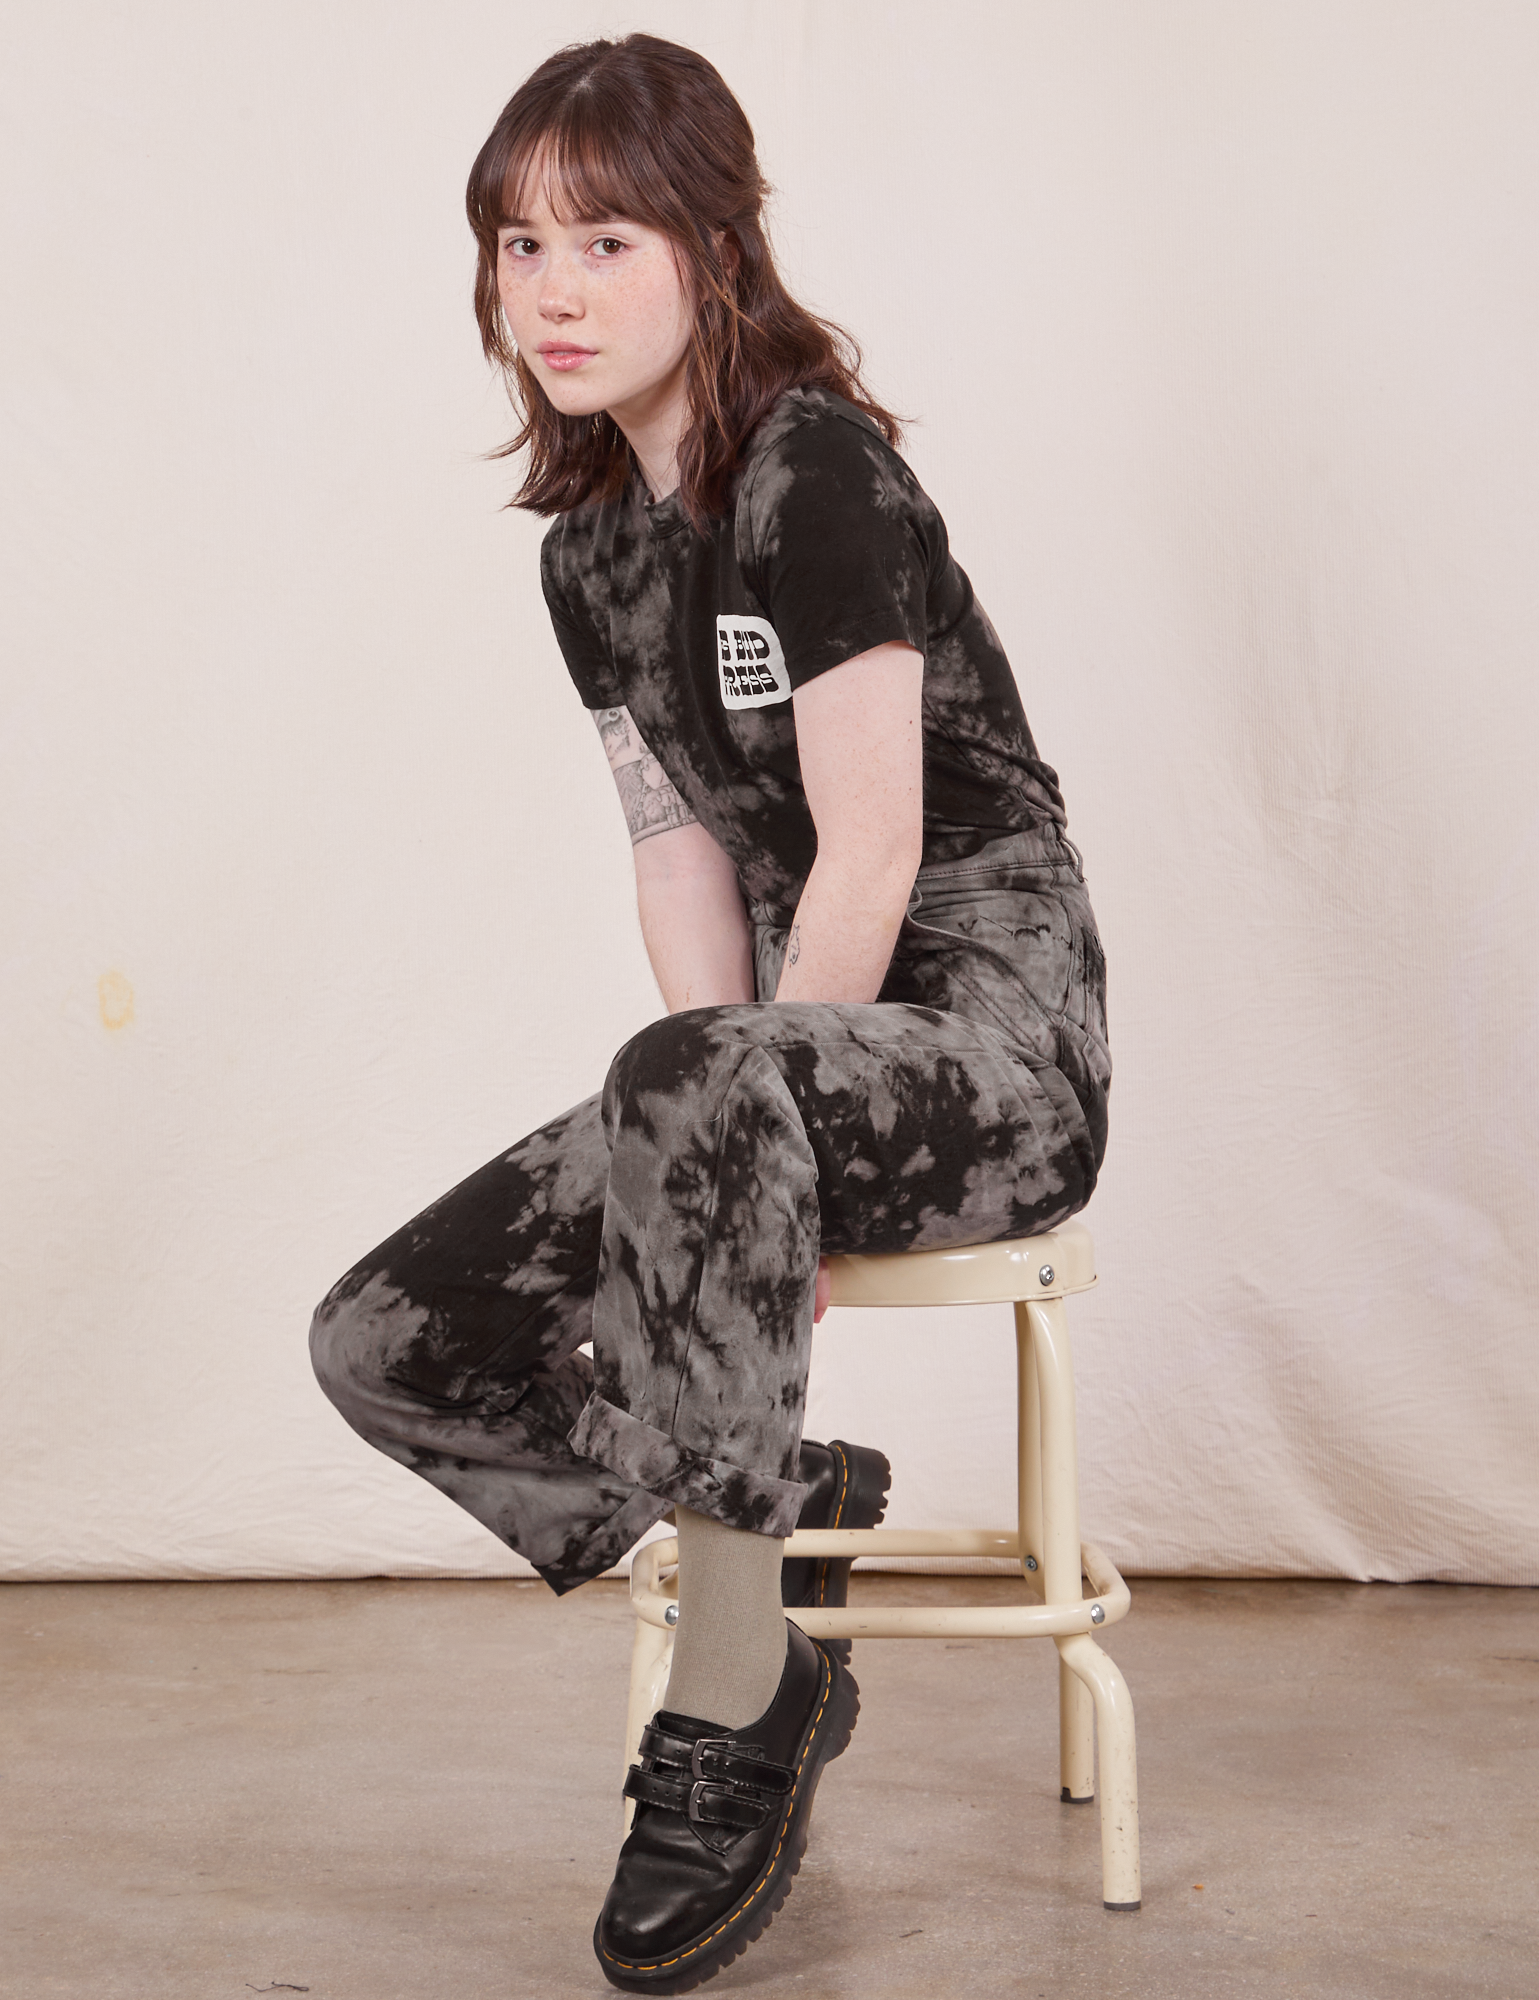 Hana is wearing Black Magic Waters Tee paired with matching Work Pants